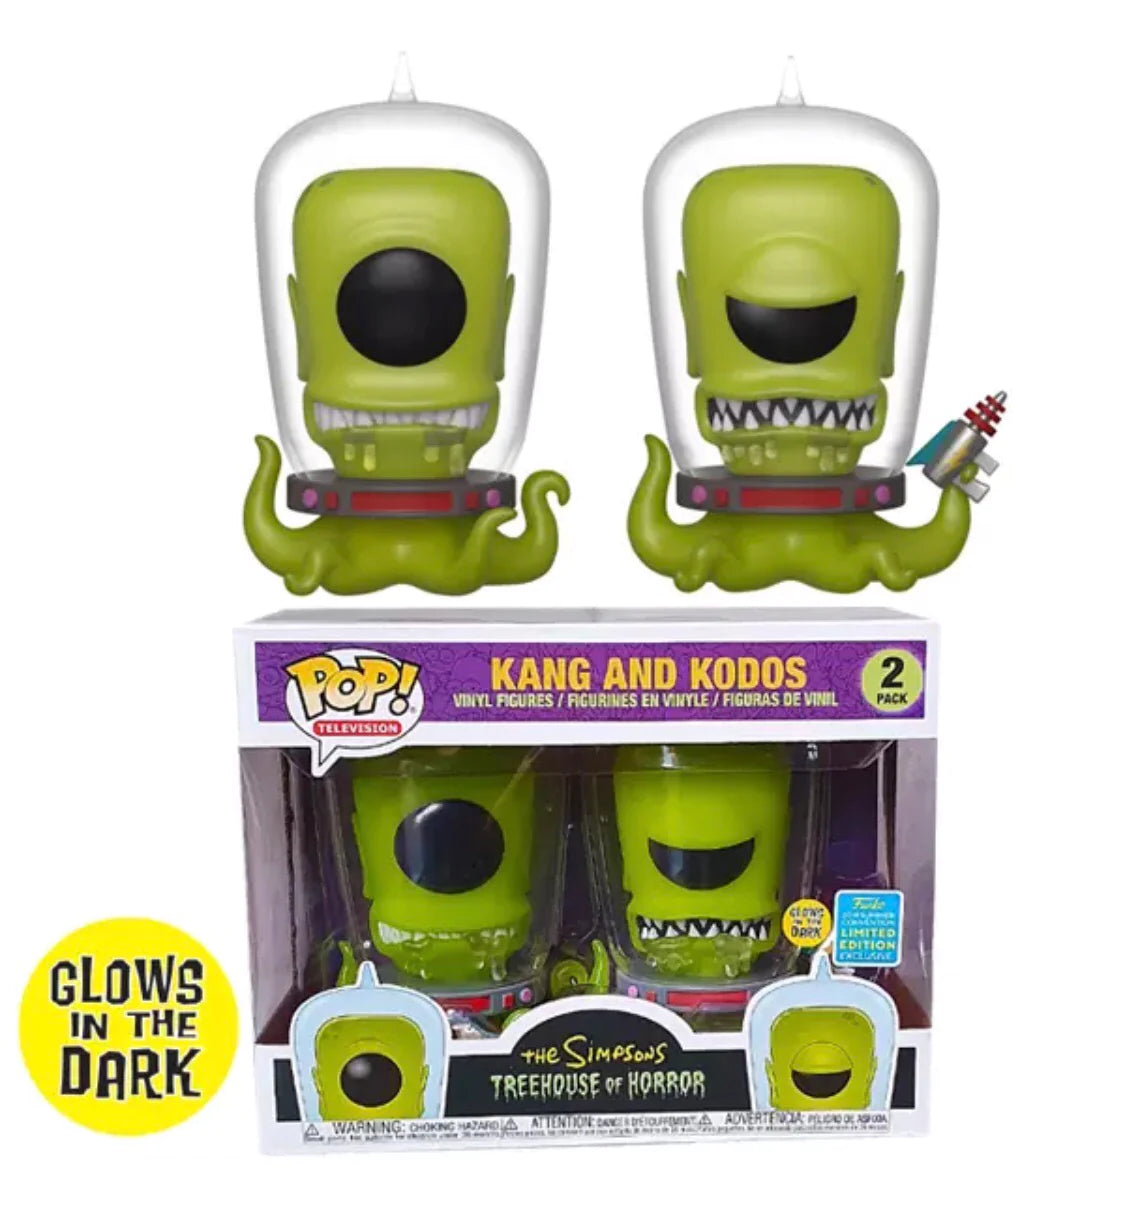 Funko POP! Television - Simpsons treehouse of horror - Kang and Kodos 2 pack GITD 2019 Summer convention